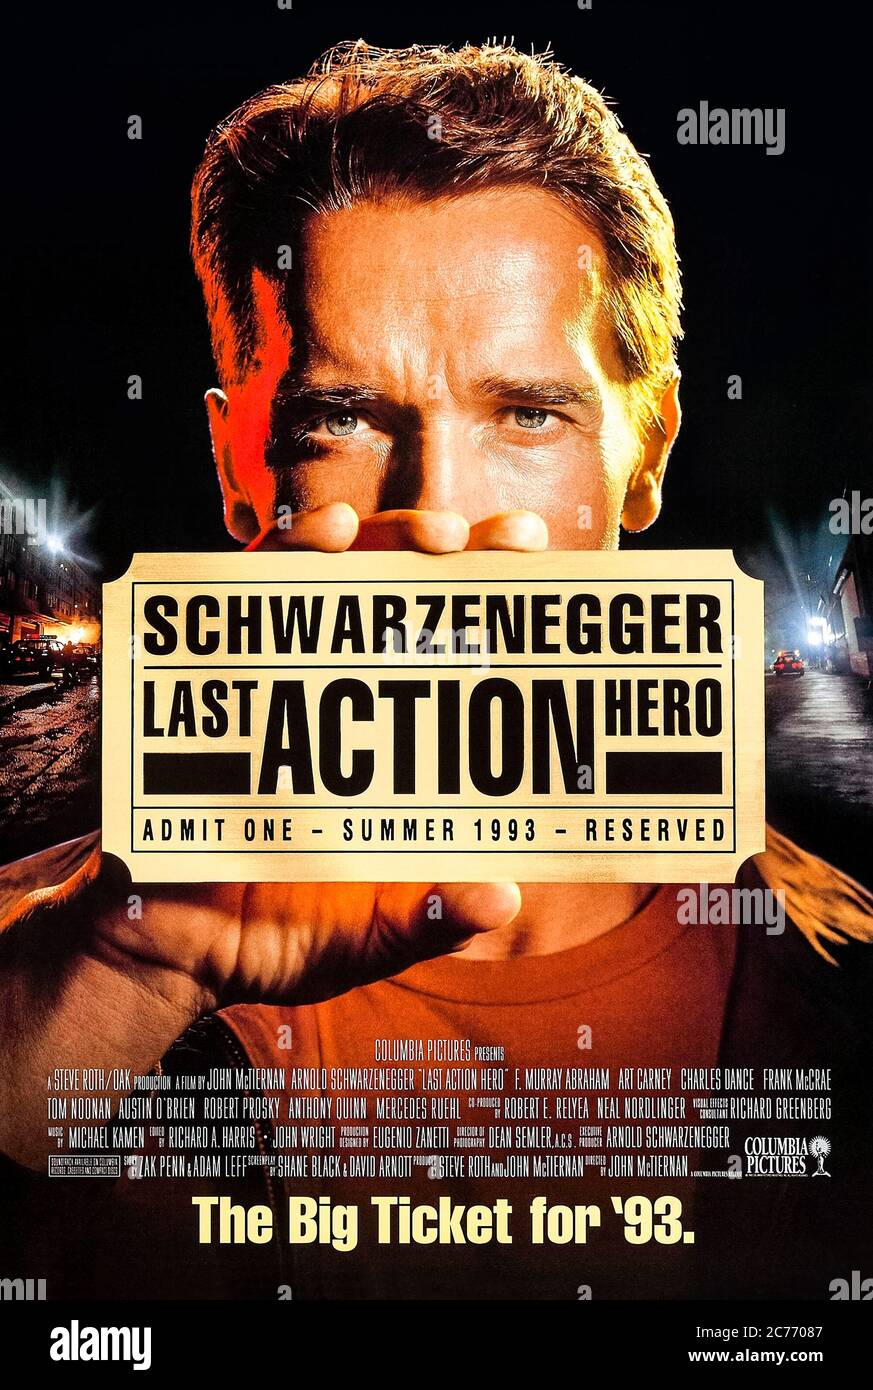 Last Action Hero (1993) directed by John McTiernan and starring Arnold Schwarzenegger, F. Murray Abraham, Art Carney and Charles Dance. A child gets transported into the movie by a magic ticket but must stop the bad guy escaping into the real world. Stock Photo